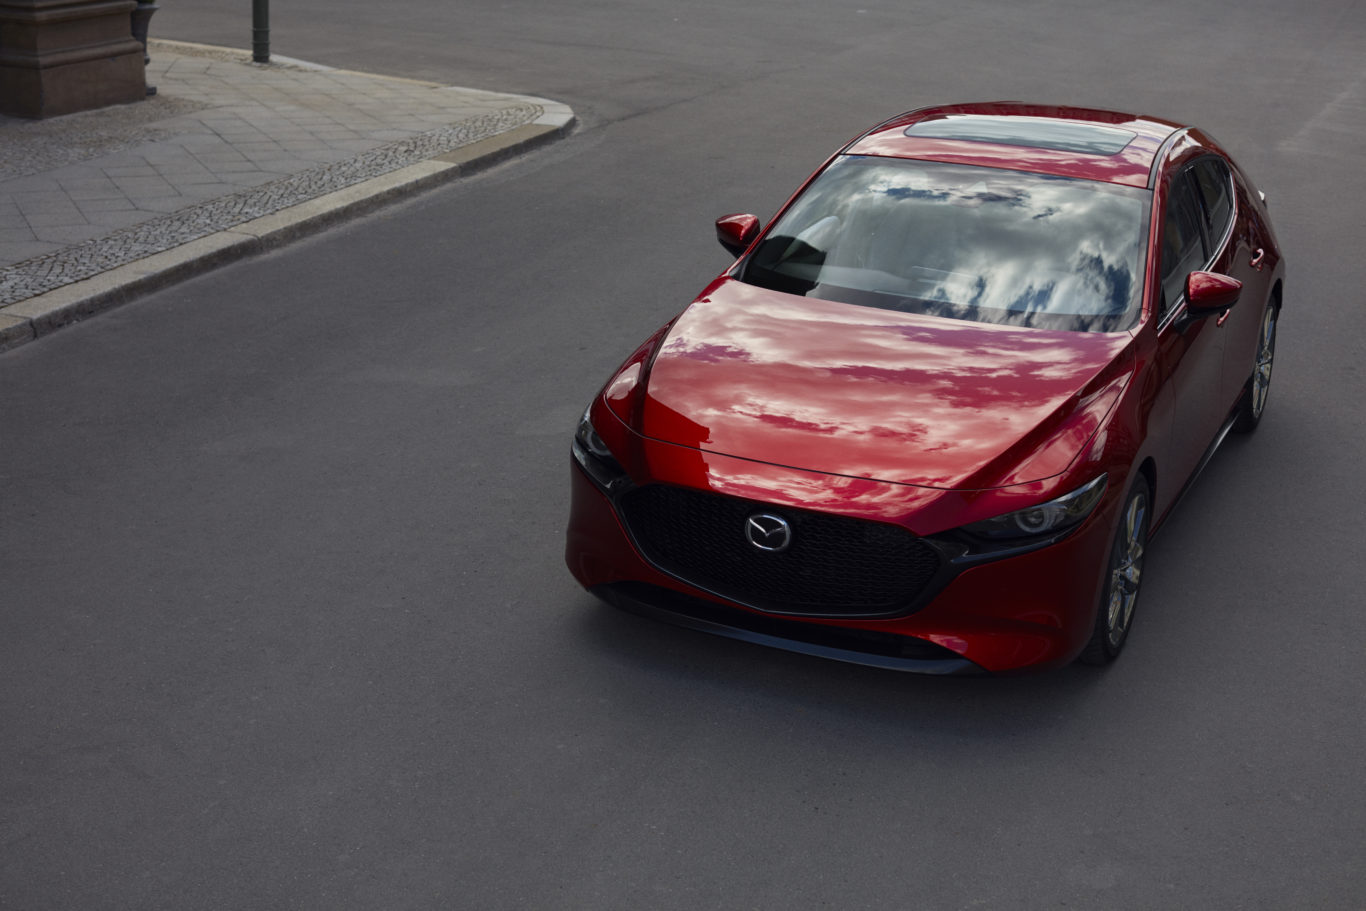 The new Mazda 3 represents a stylish update of one of Mazda's most popular models 